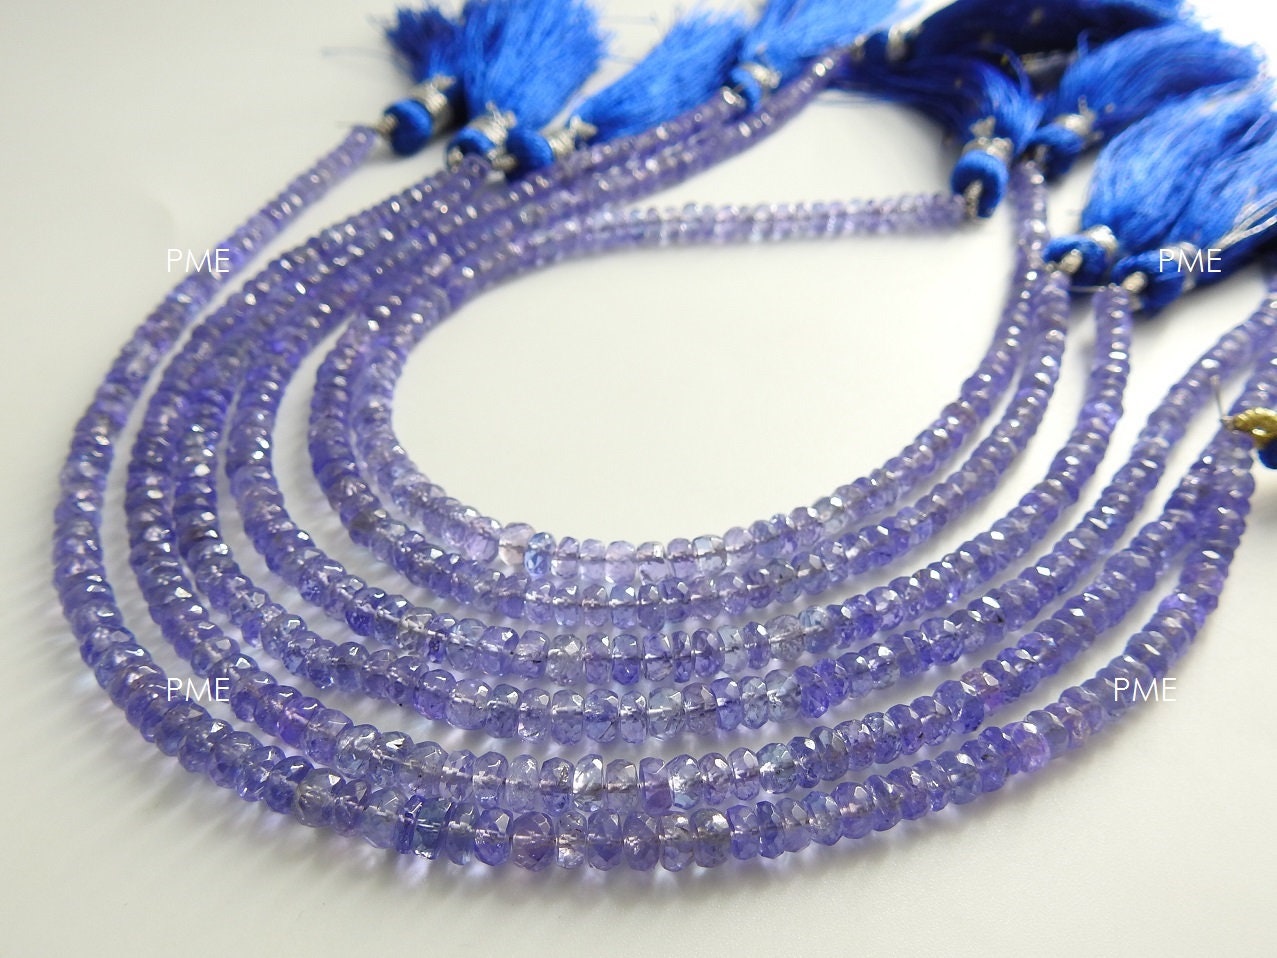 Tanzanite Faceted Roundel Bead,Blue,Handmade,Loose Stone,High Quality,Gemstone Bead,For Jewelry Making 100%Natural 9Inch Strand PME(B8) | Save 33% - Rajasthan Living 25